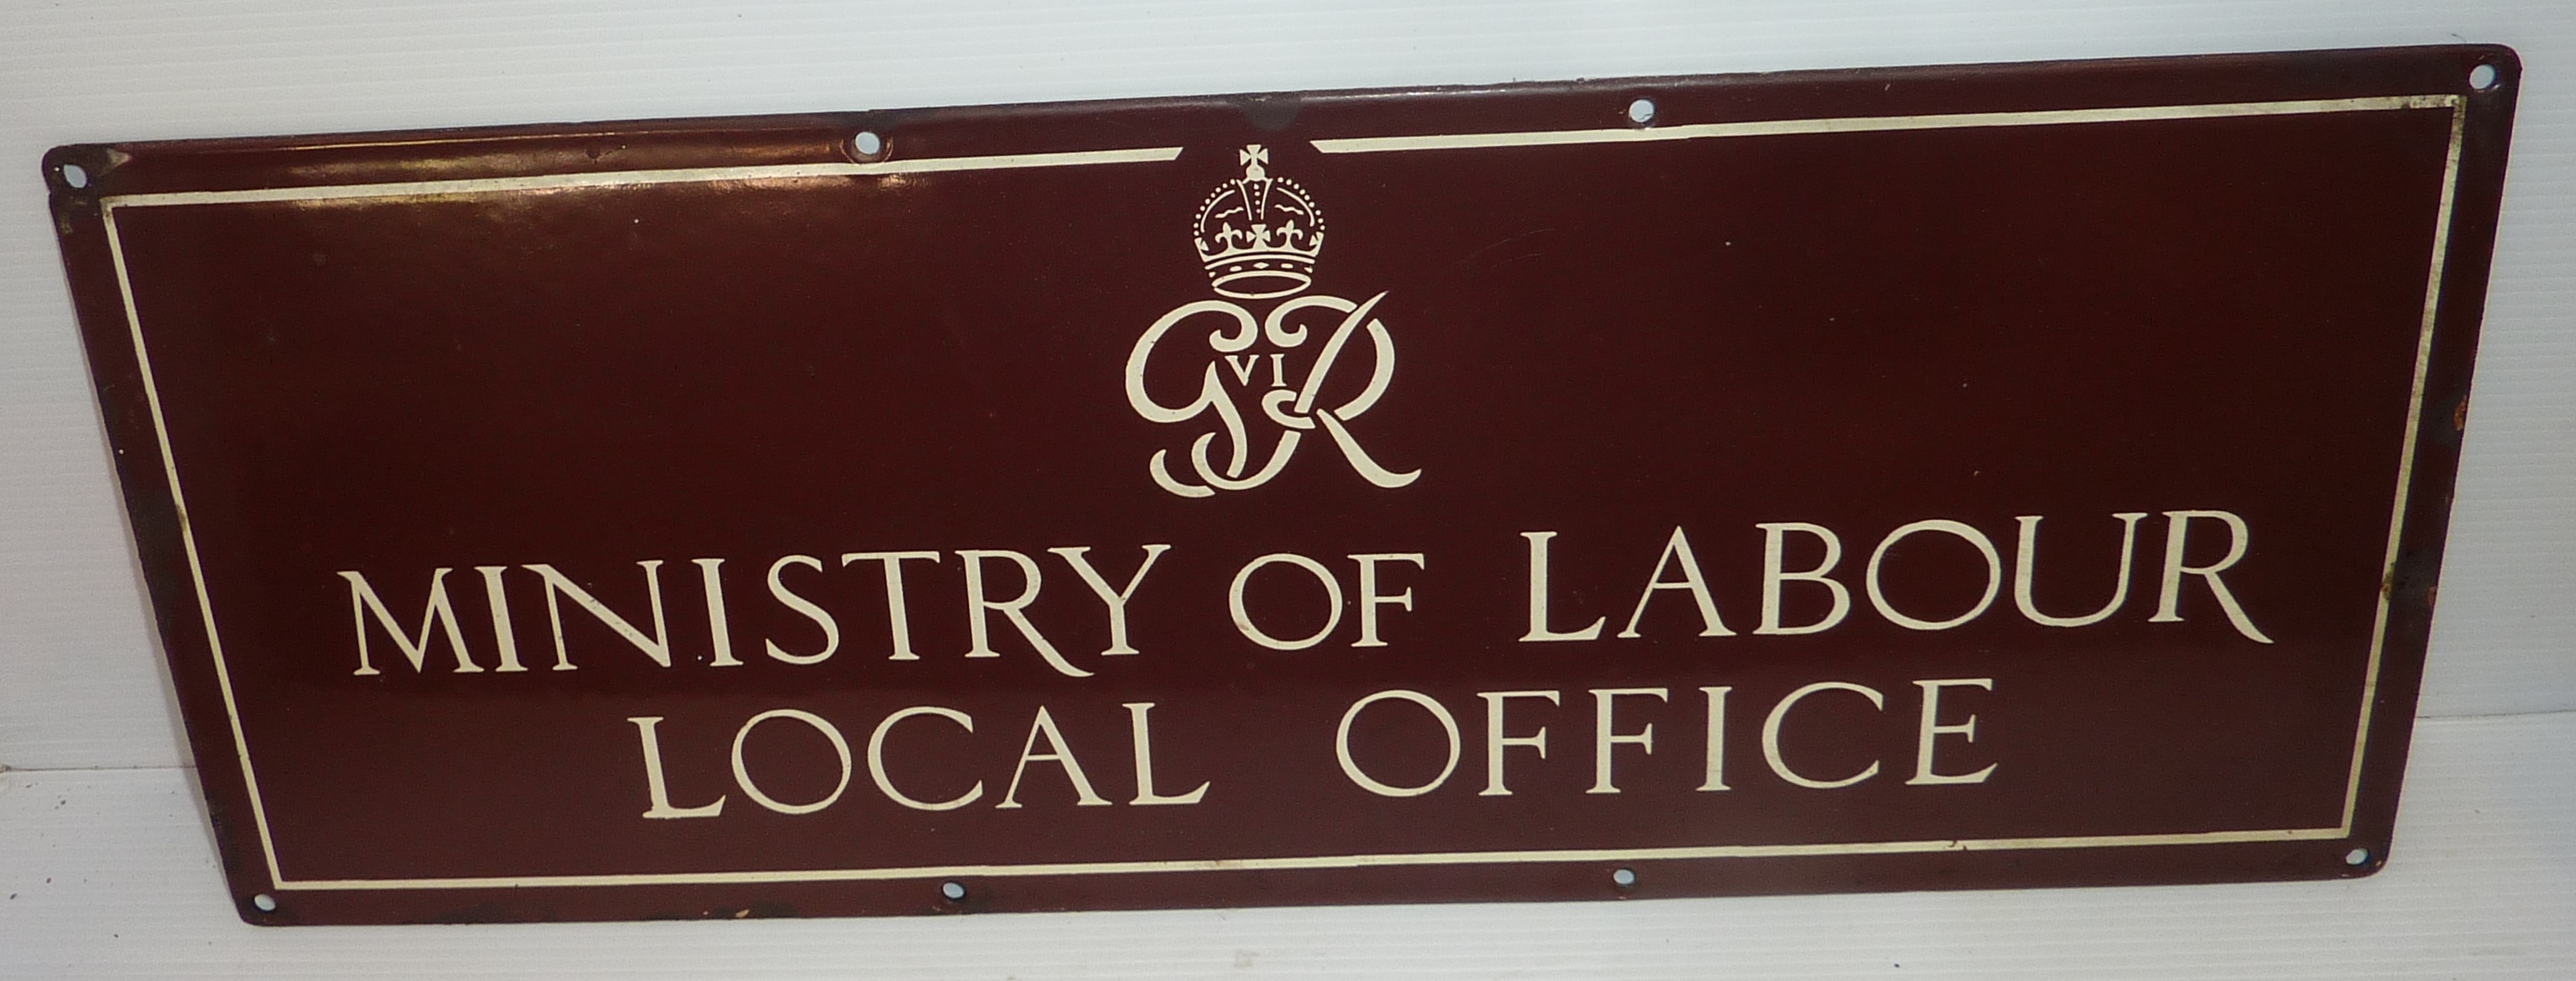 Enamel sign 'Ministry Of Labour Local Office'